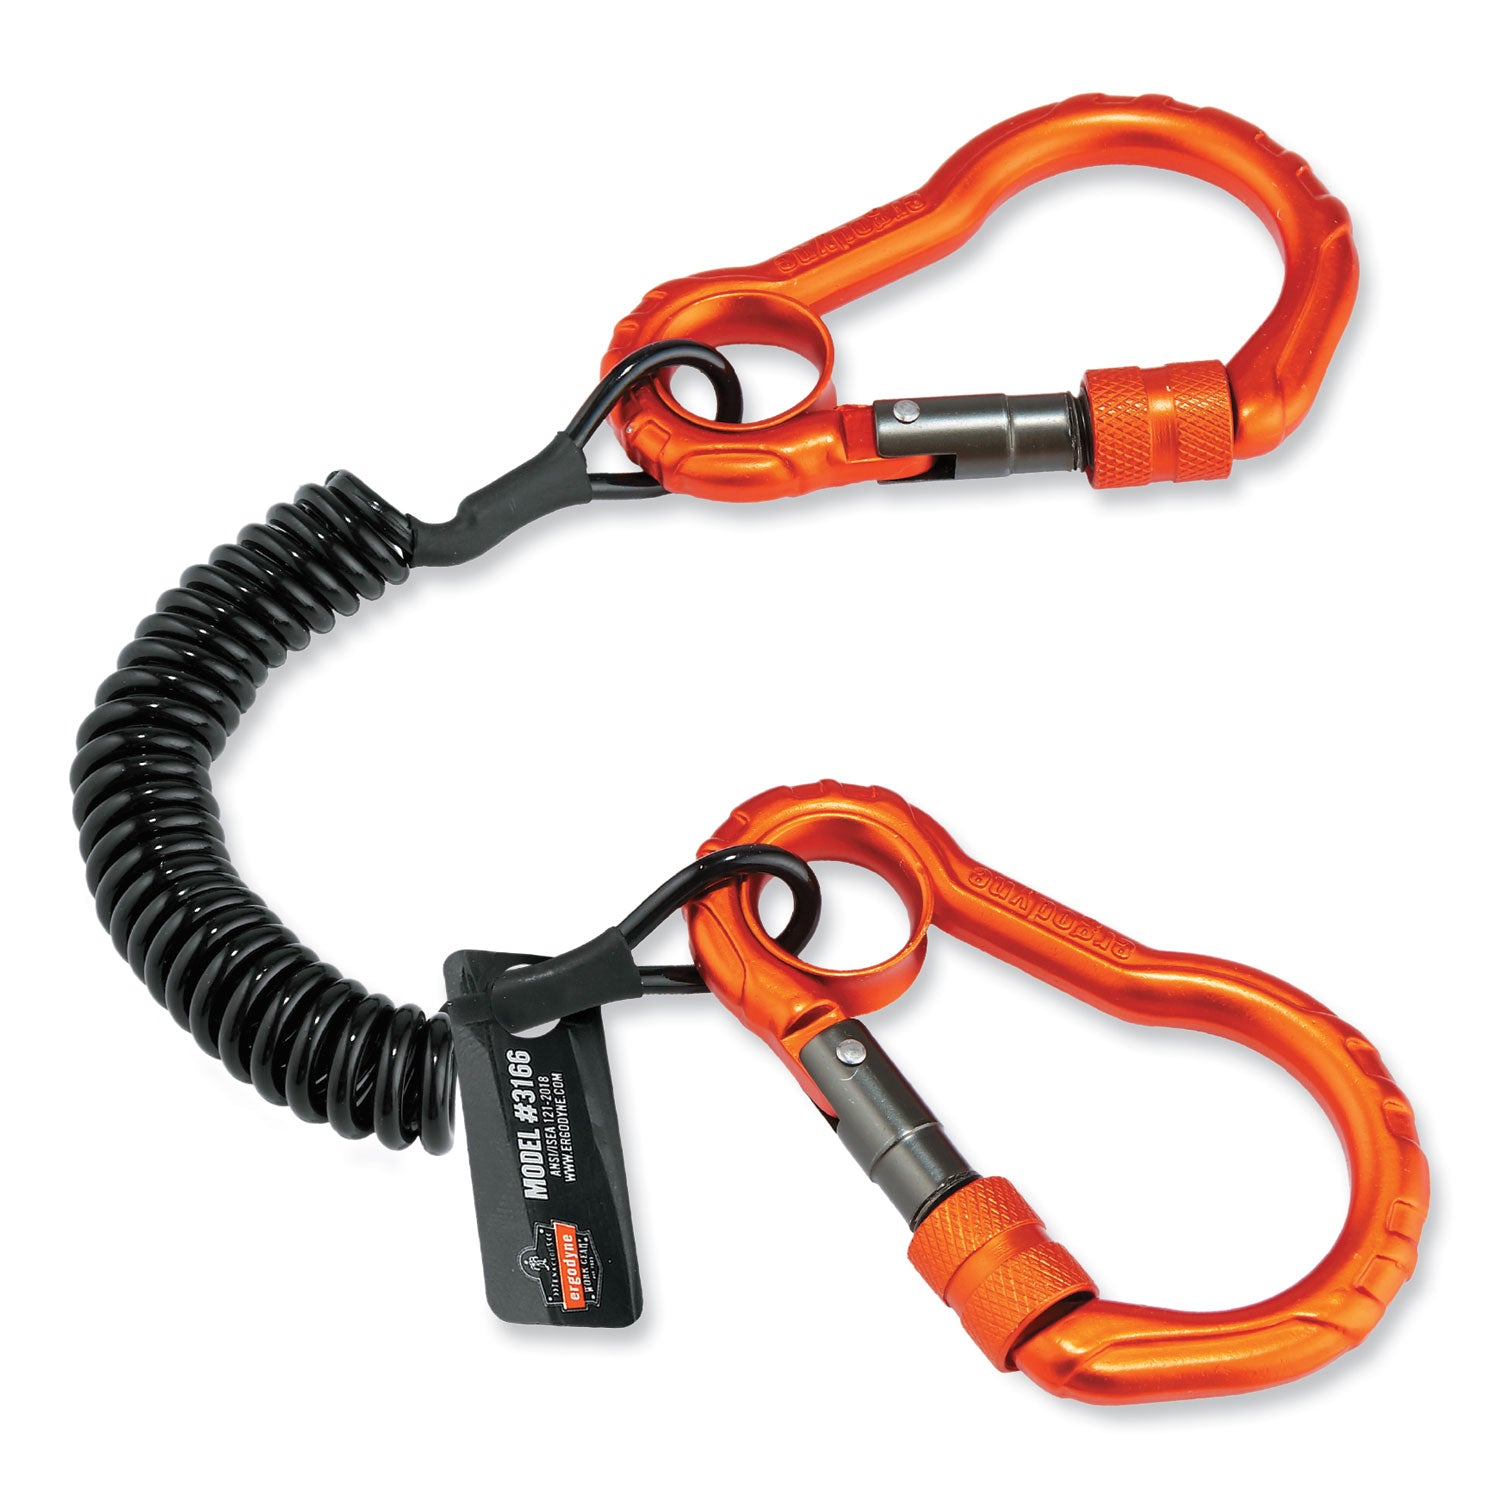 squids-3166-coiled-tool-lanyard-with-two-carabiners-2-lb-max-working-capacity-12-long-black-ships-in-1-3-business-days_ego19162 - 1